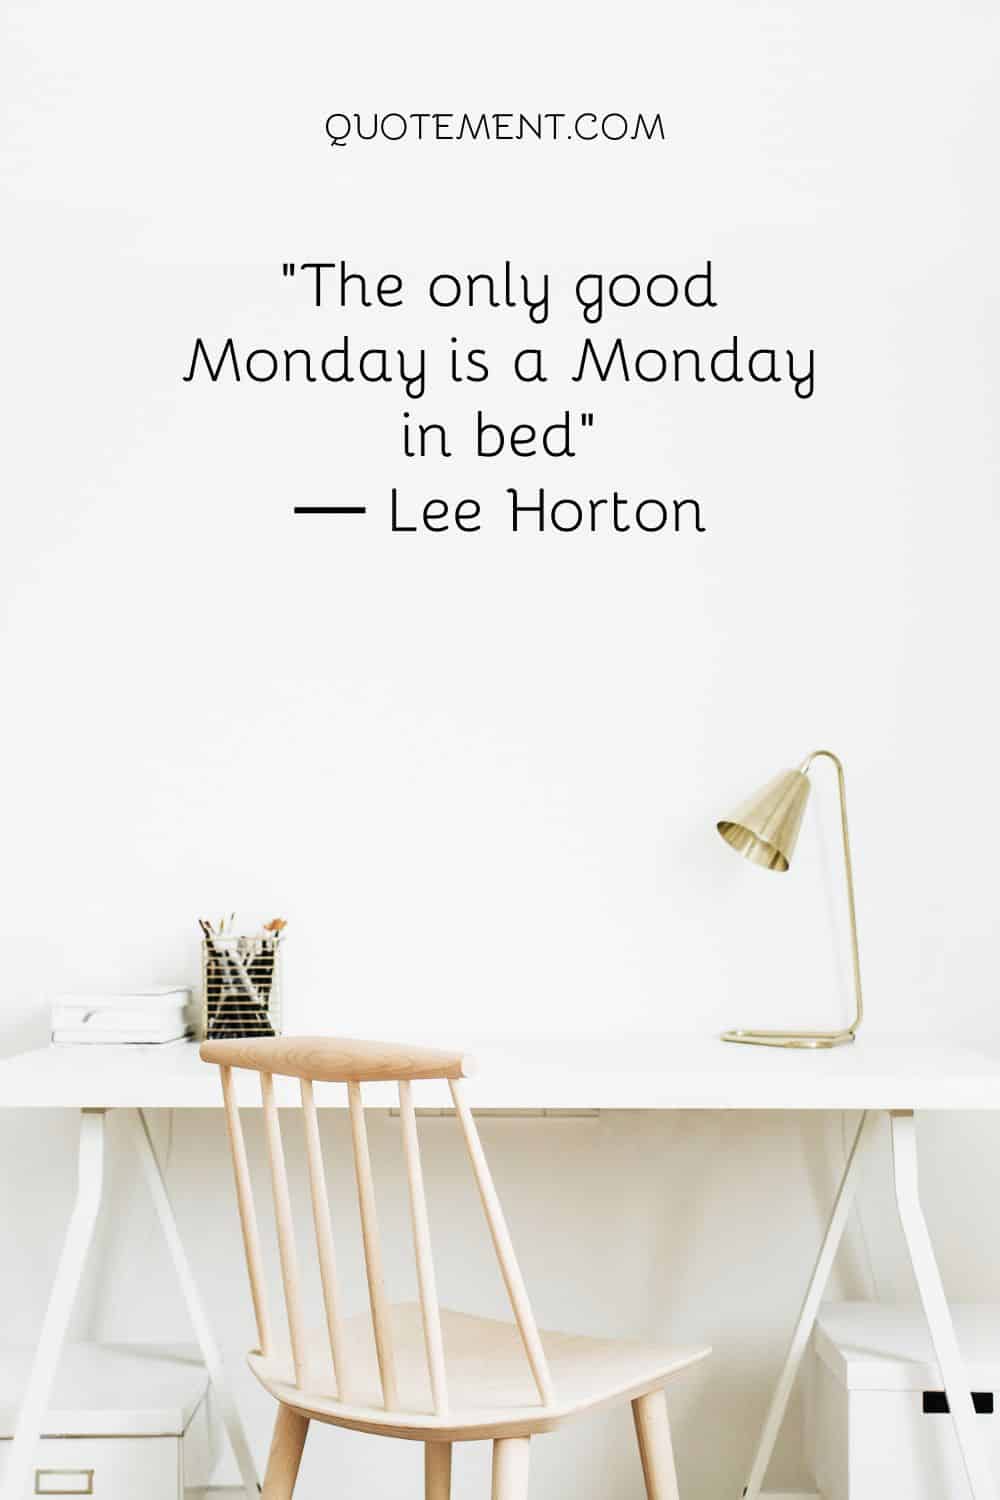 The only good Monday is a Monday in bed